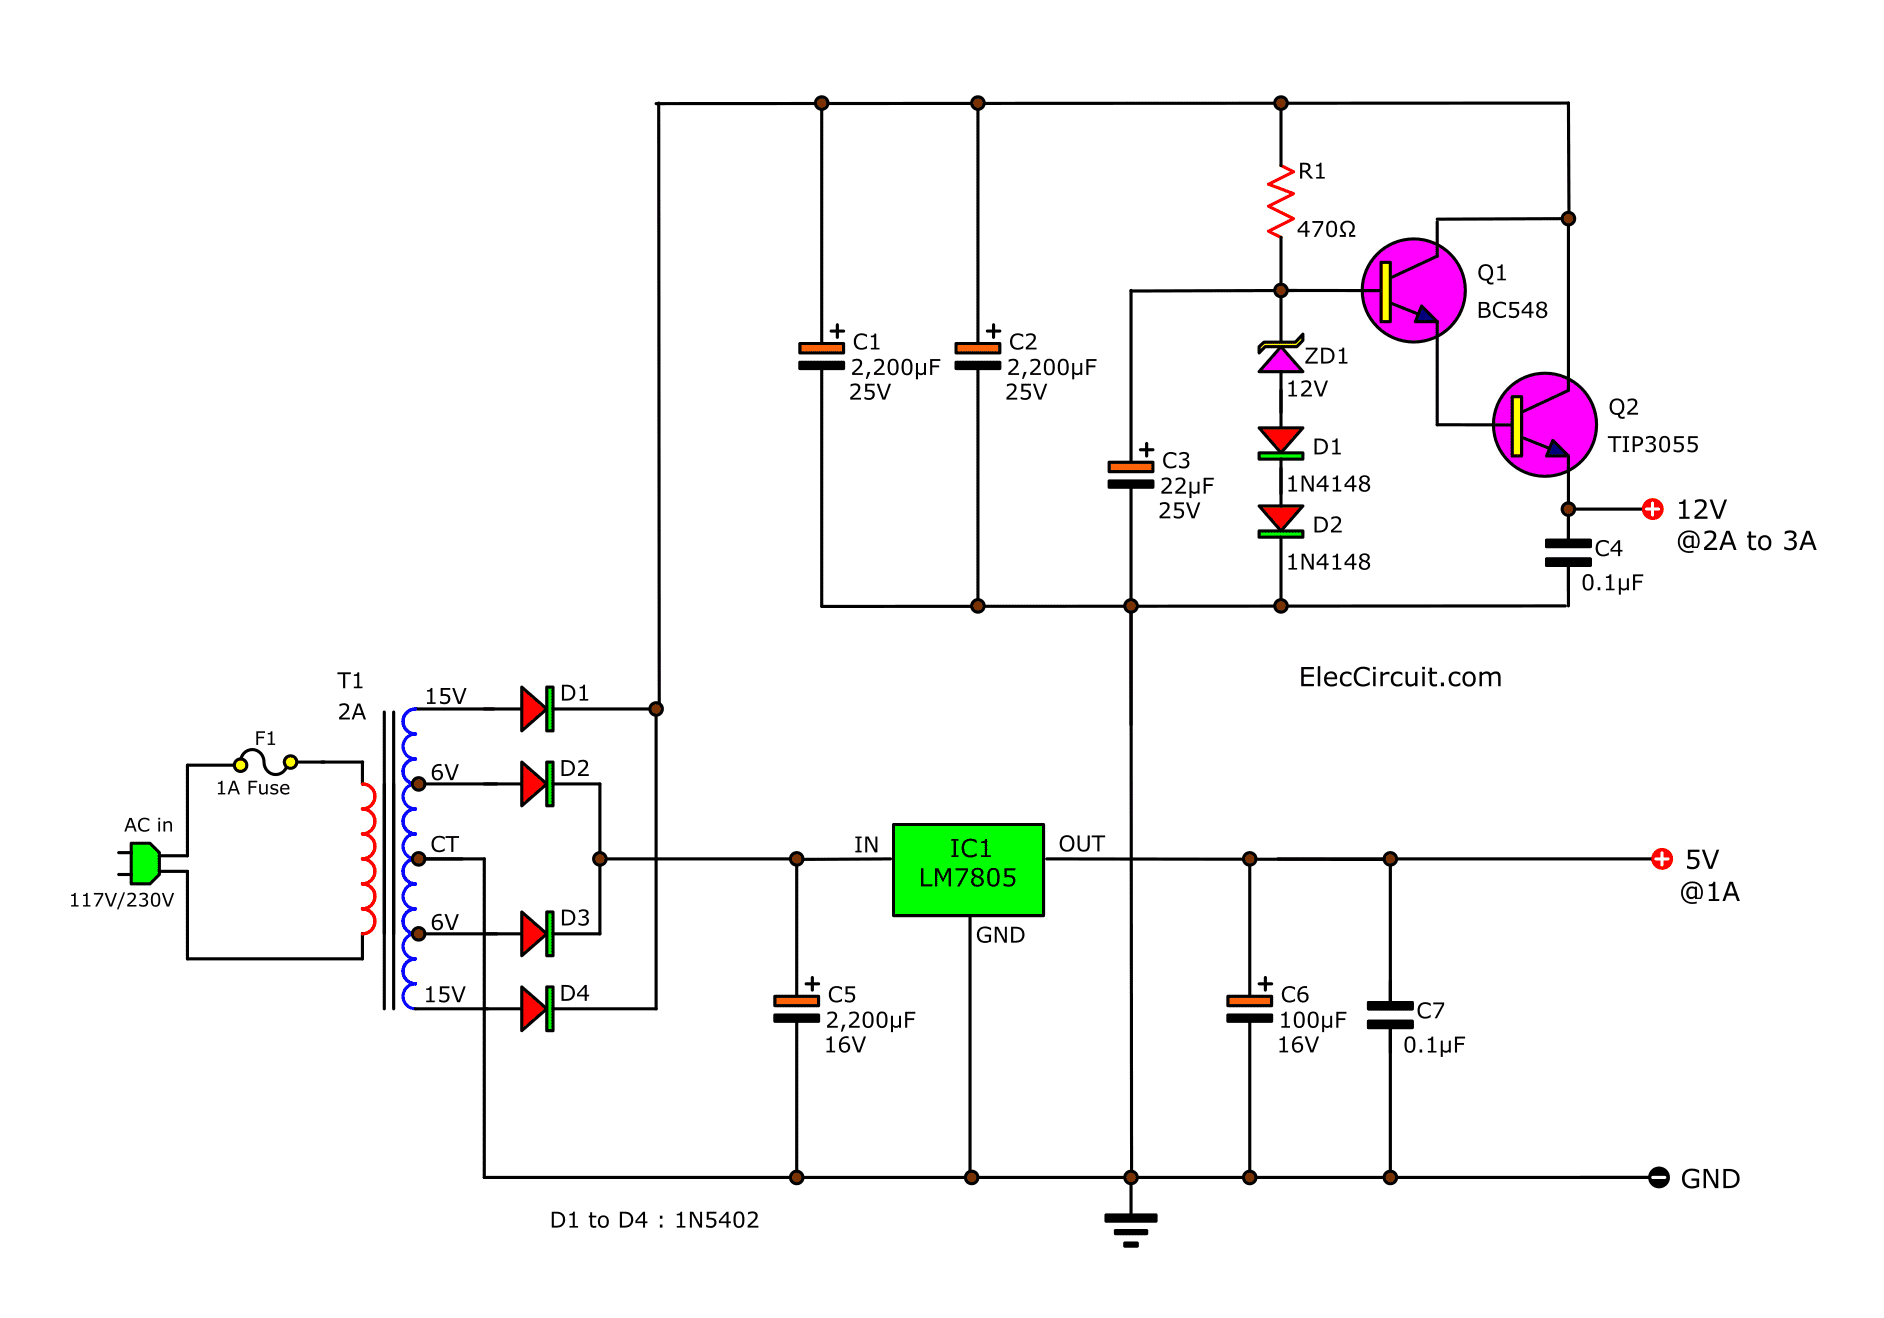 dc zener using supply power diode Electronic   ElecCircuit 5V 12V supply  circuit and power